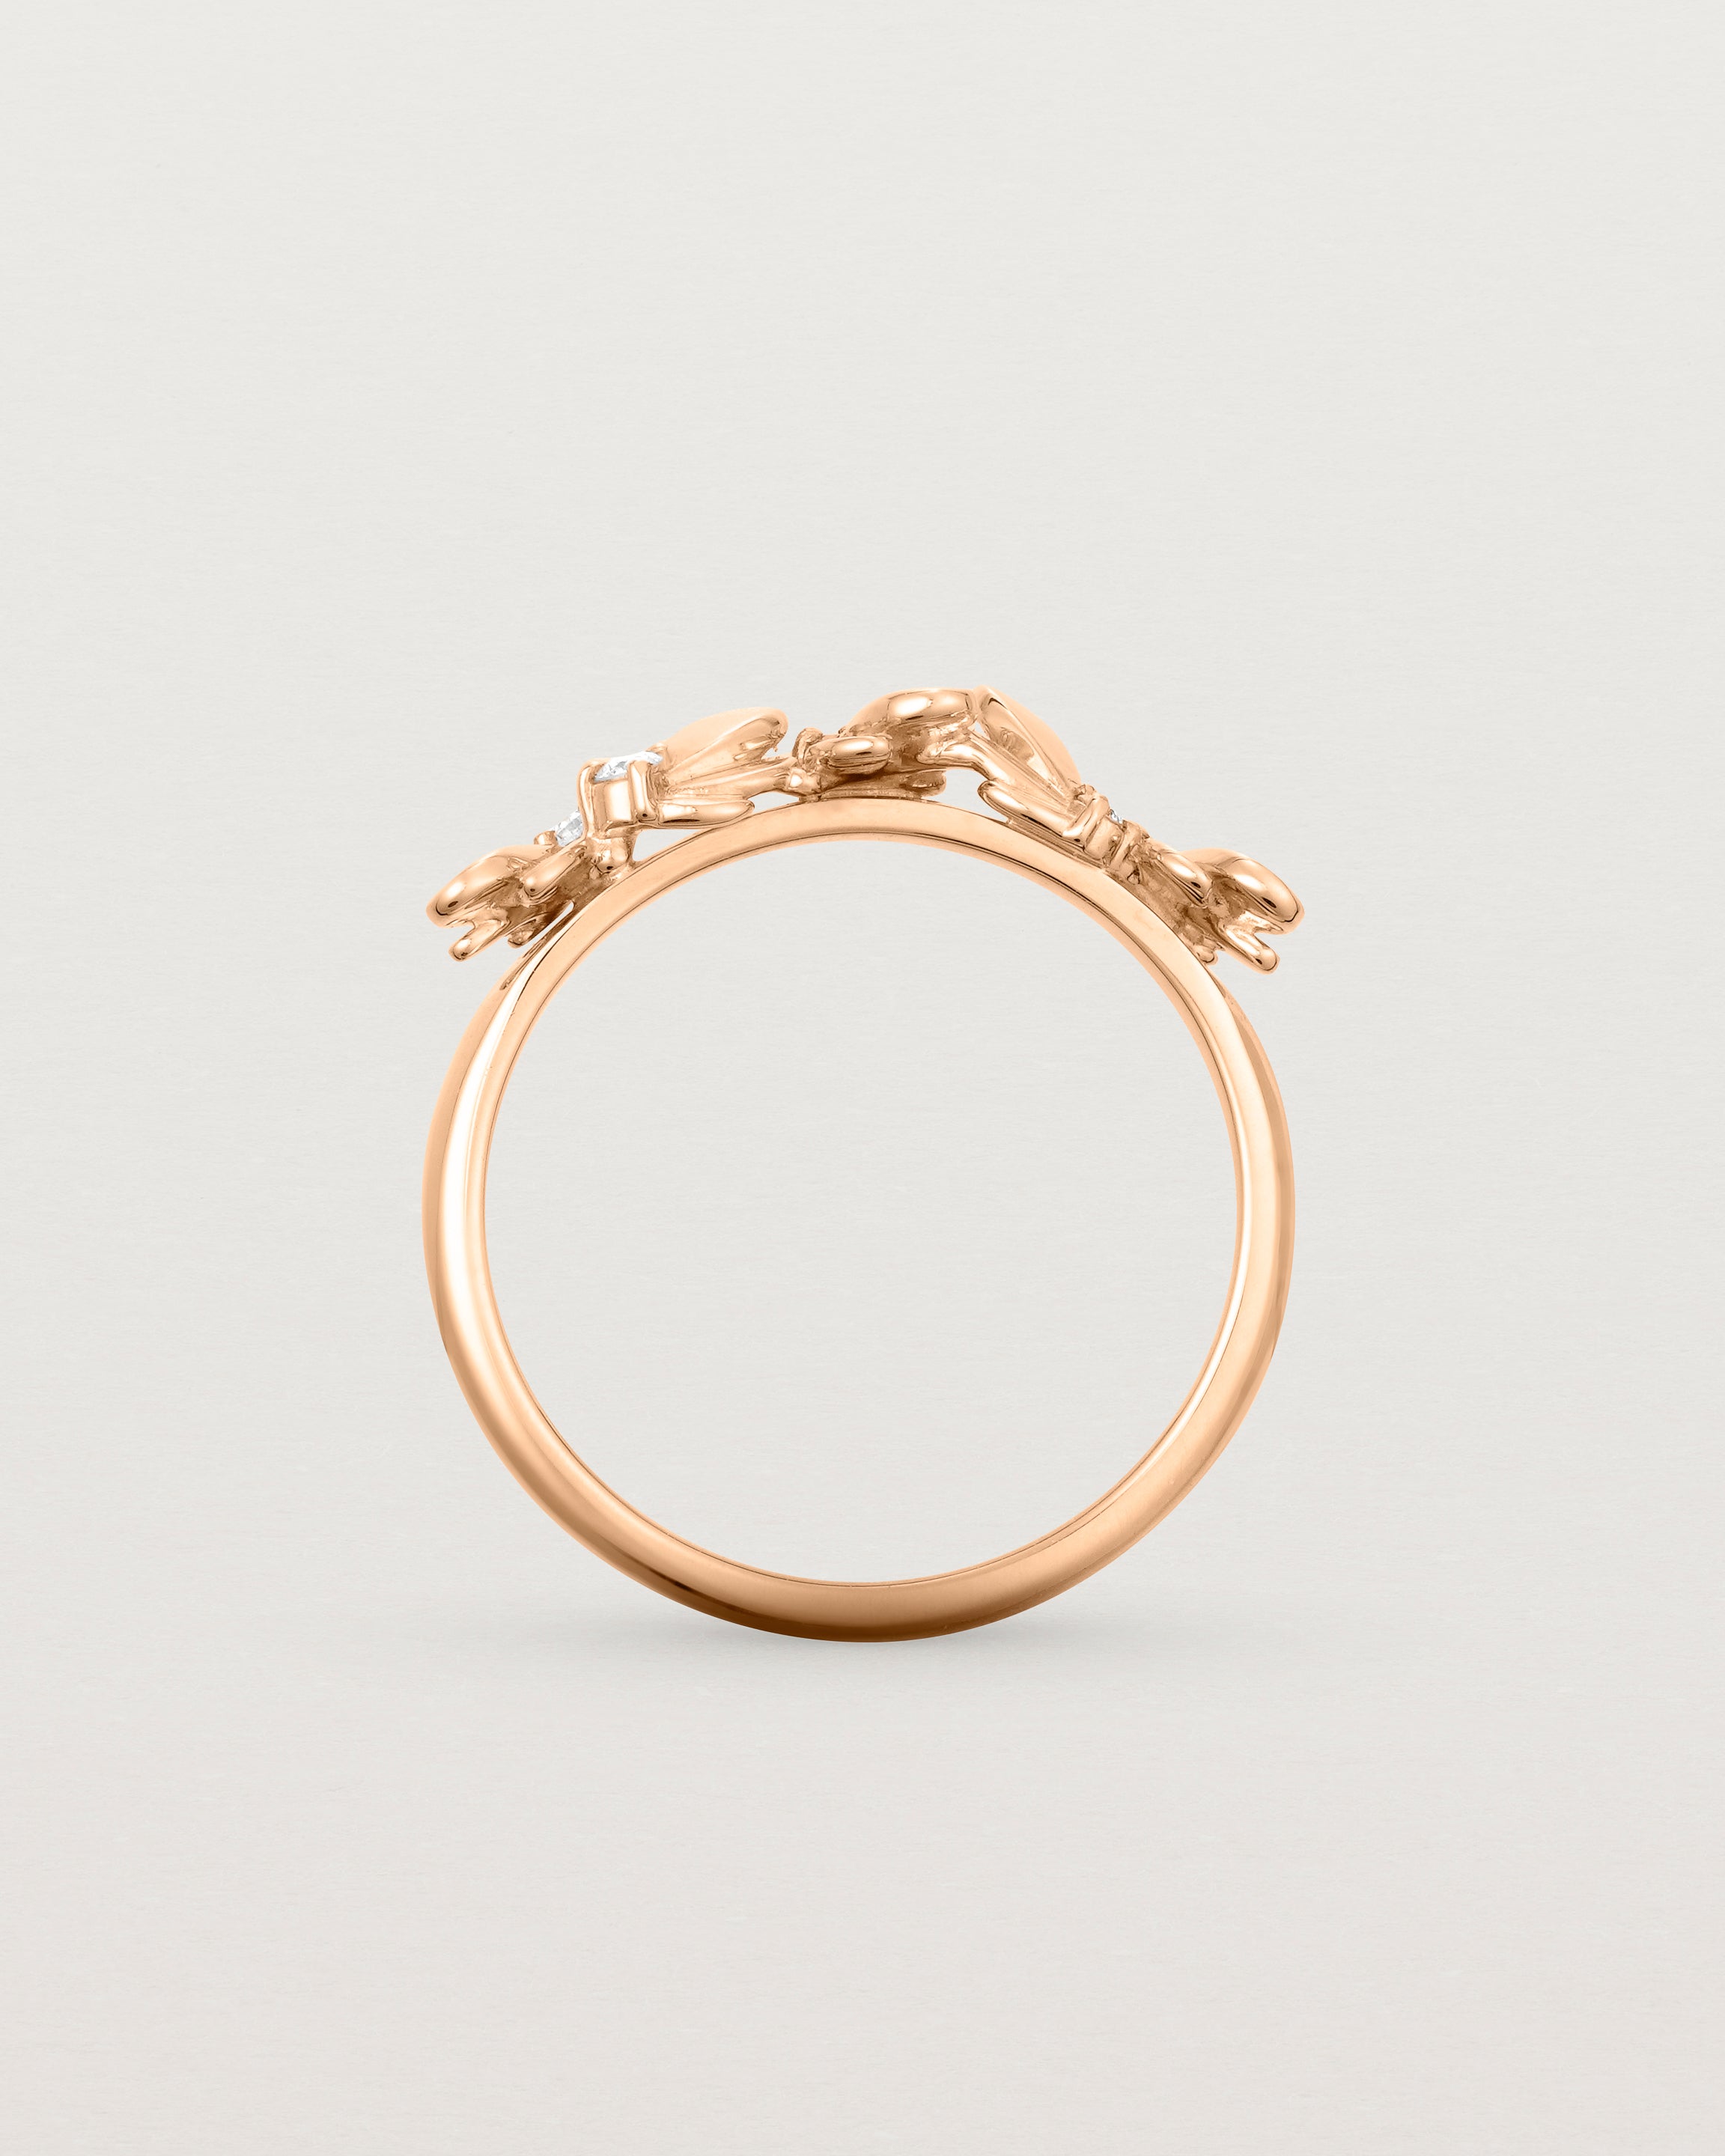 Standing view of the Aeris Wrap Ring | Diamonds in Rose Gold.